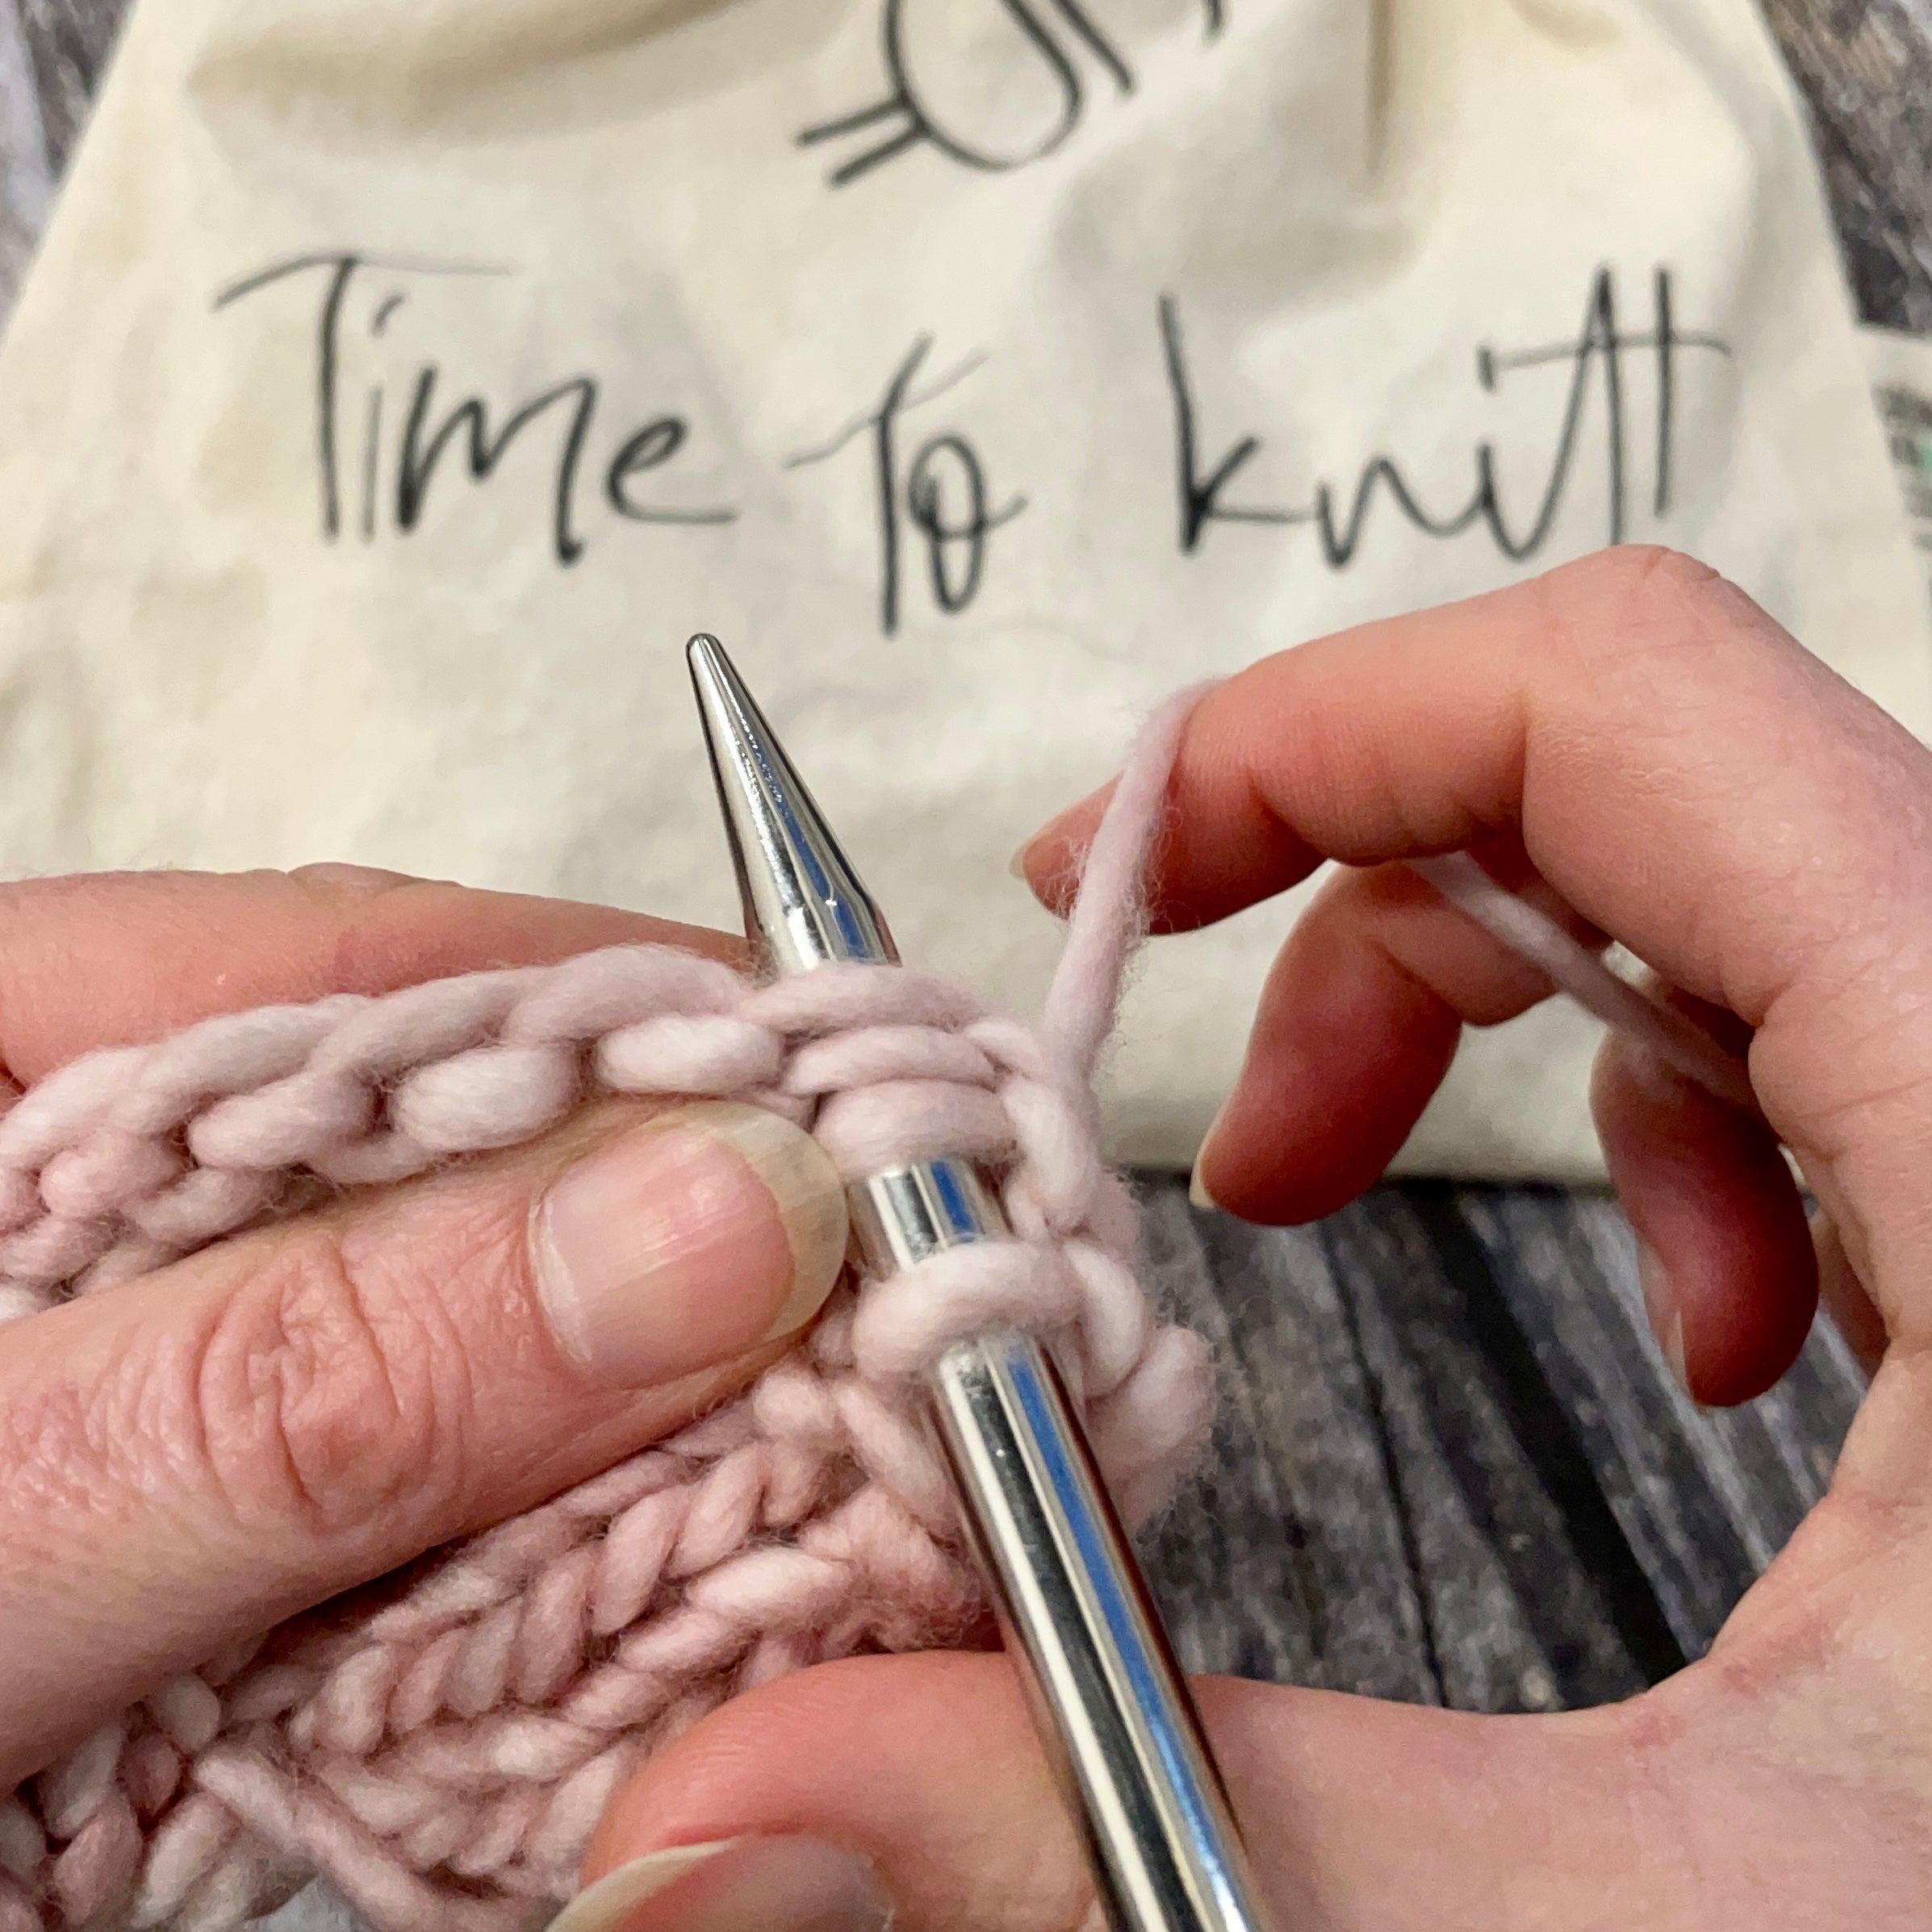 How To Pick Up Stitches in Knitting | Knitting Tutorial